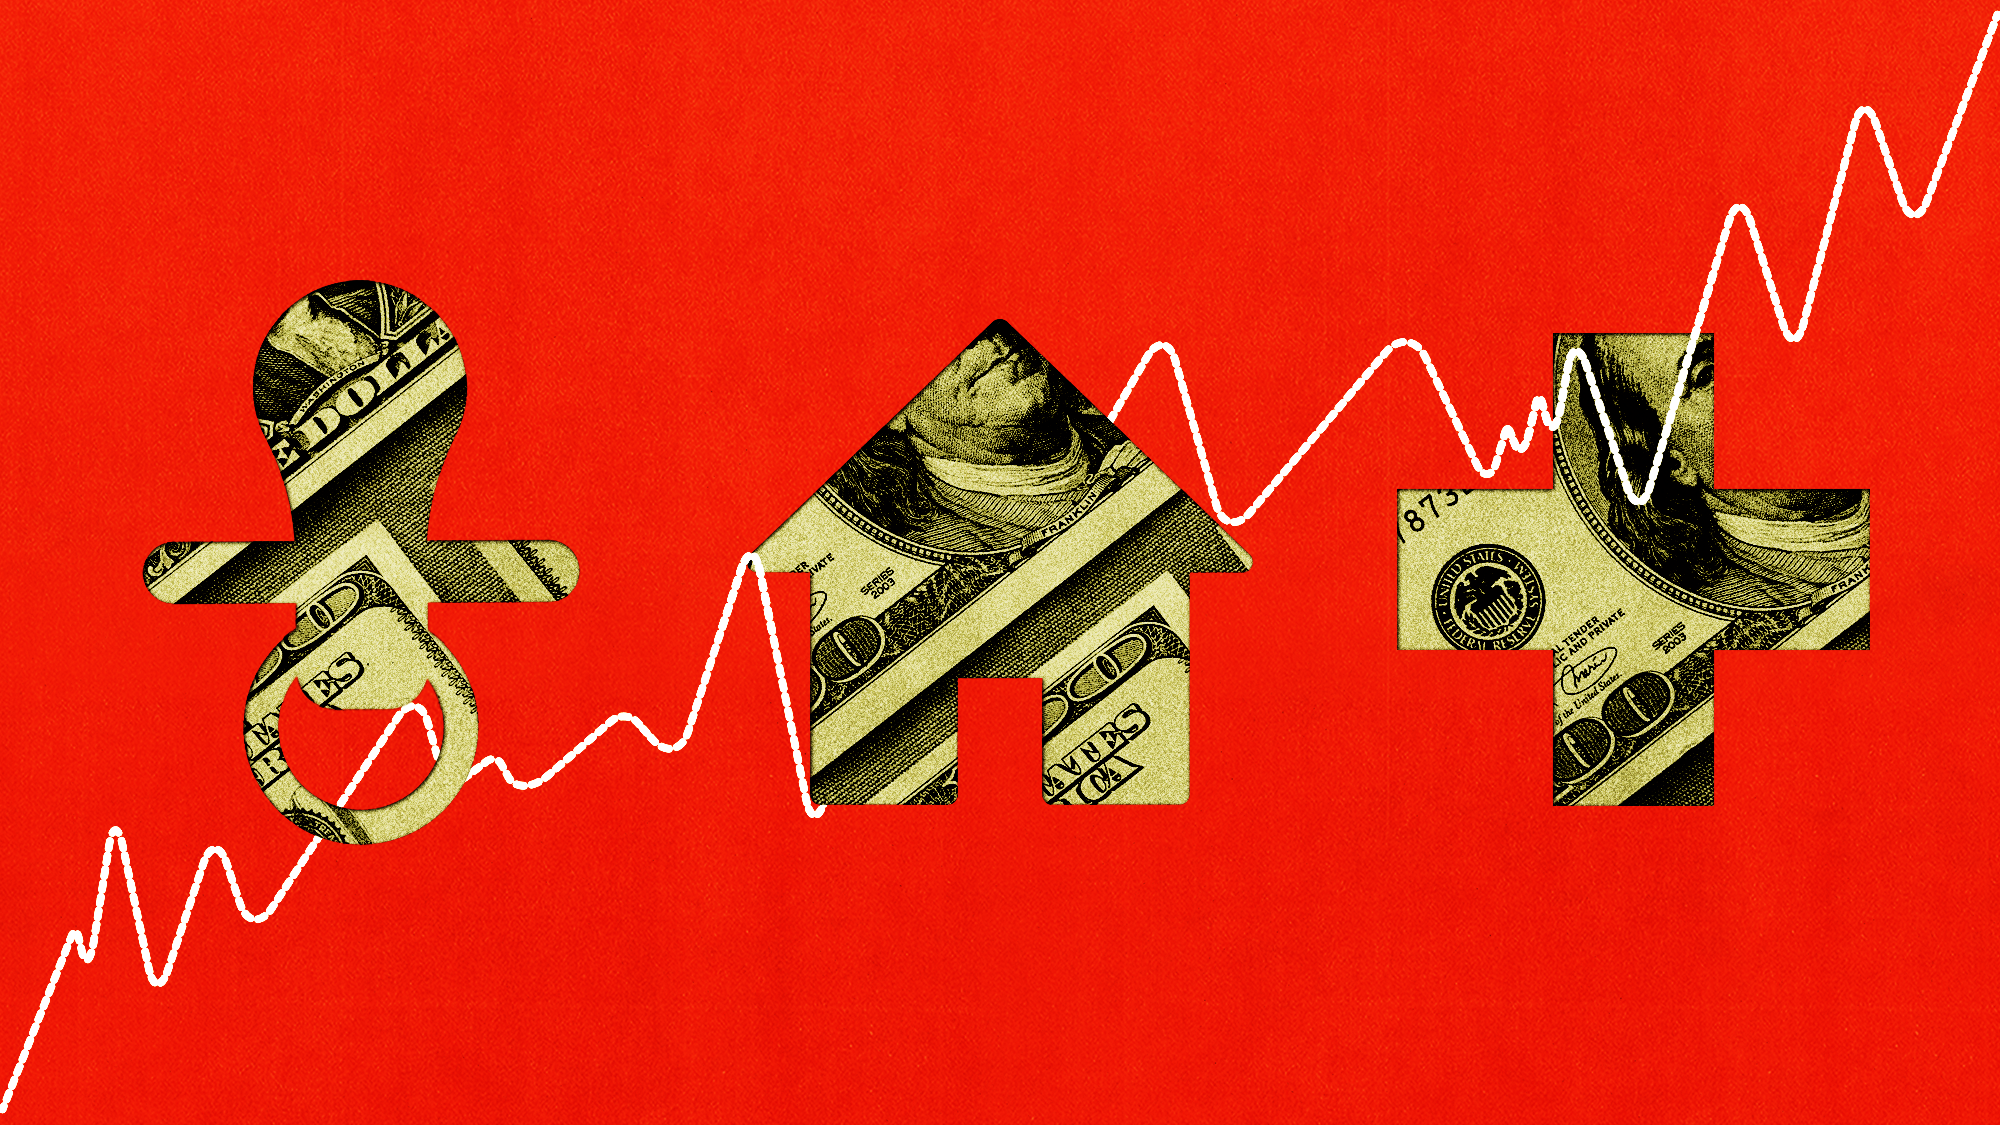 A $100 bill cut into shapes—a pacifier, a house, a plus sign—against a red background and skyrocketing line graph